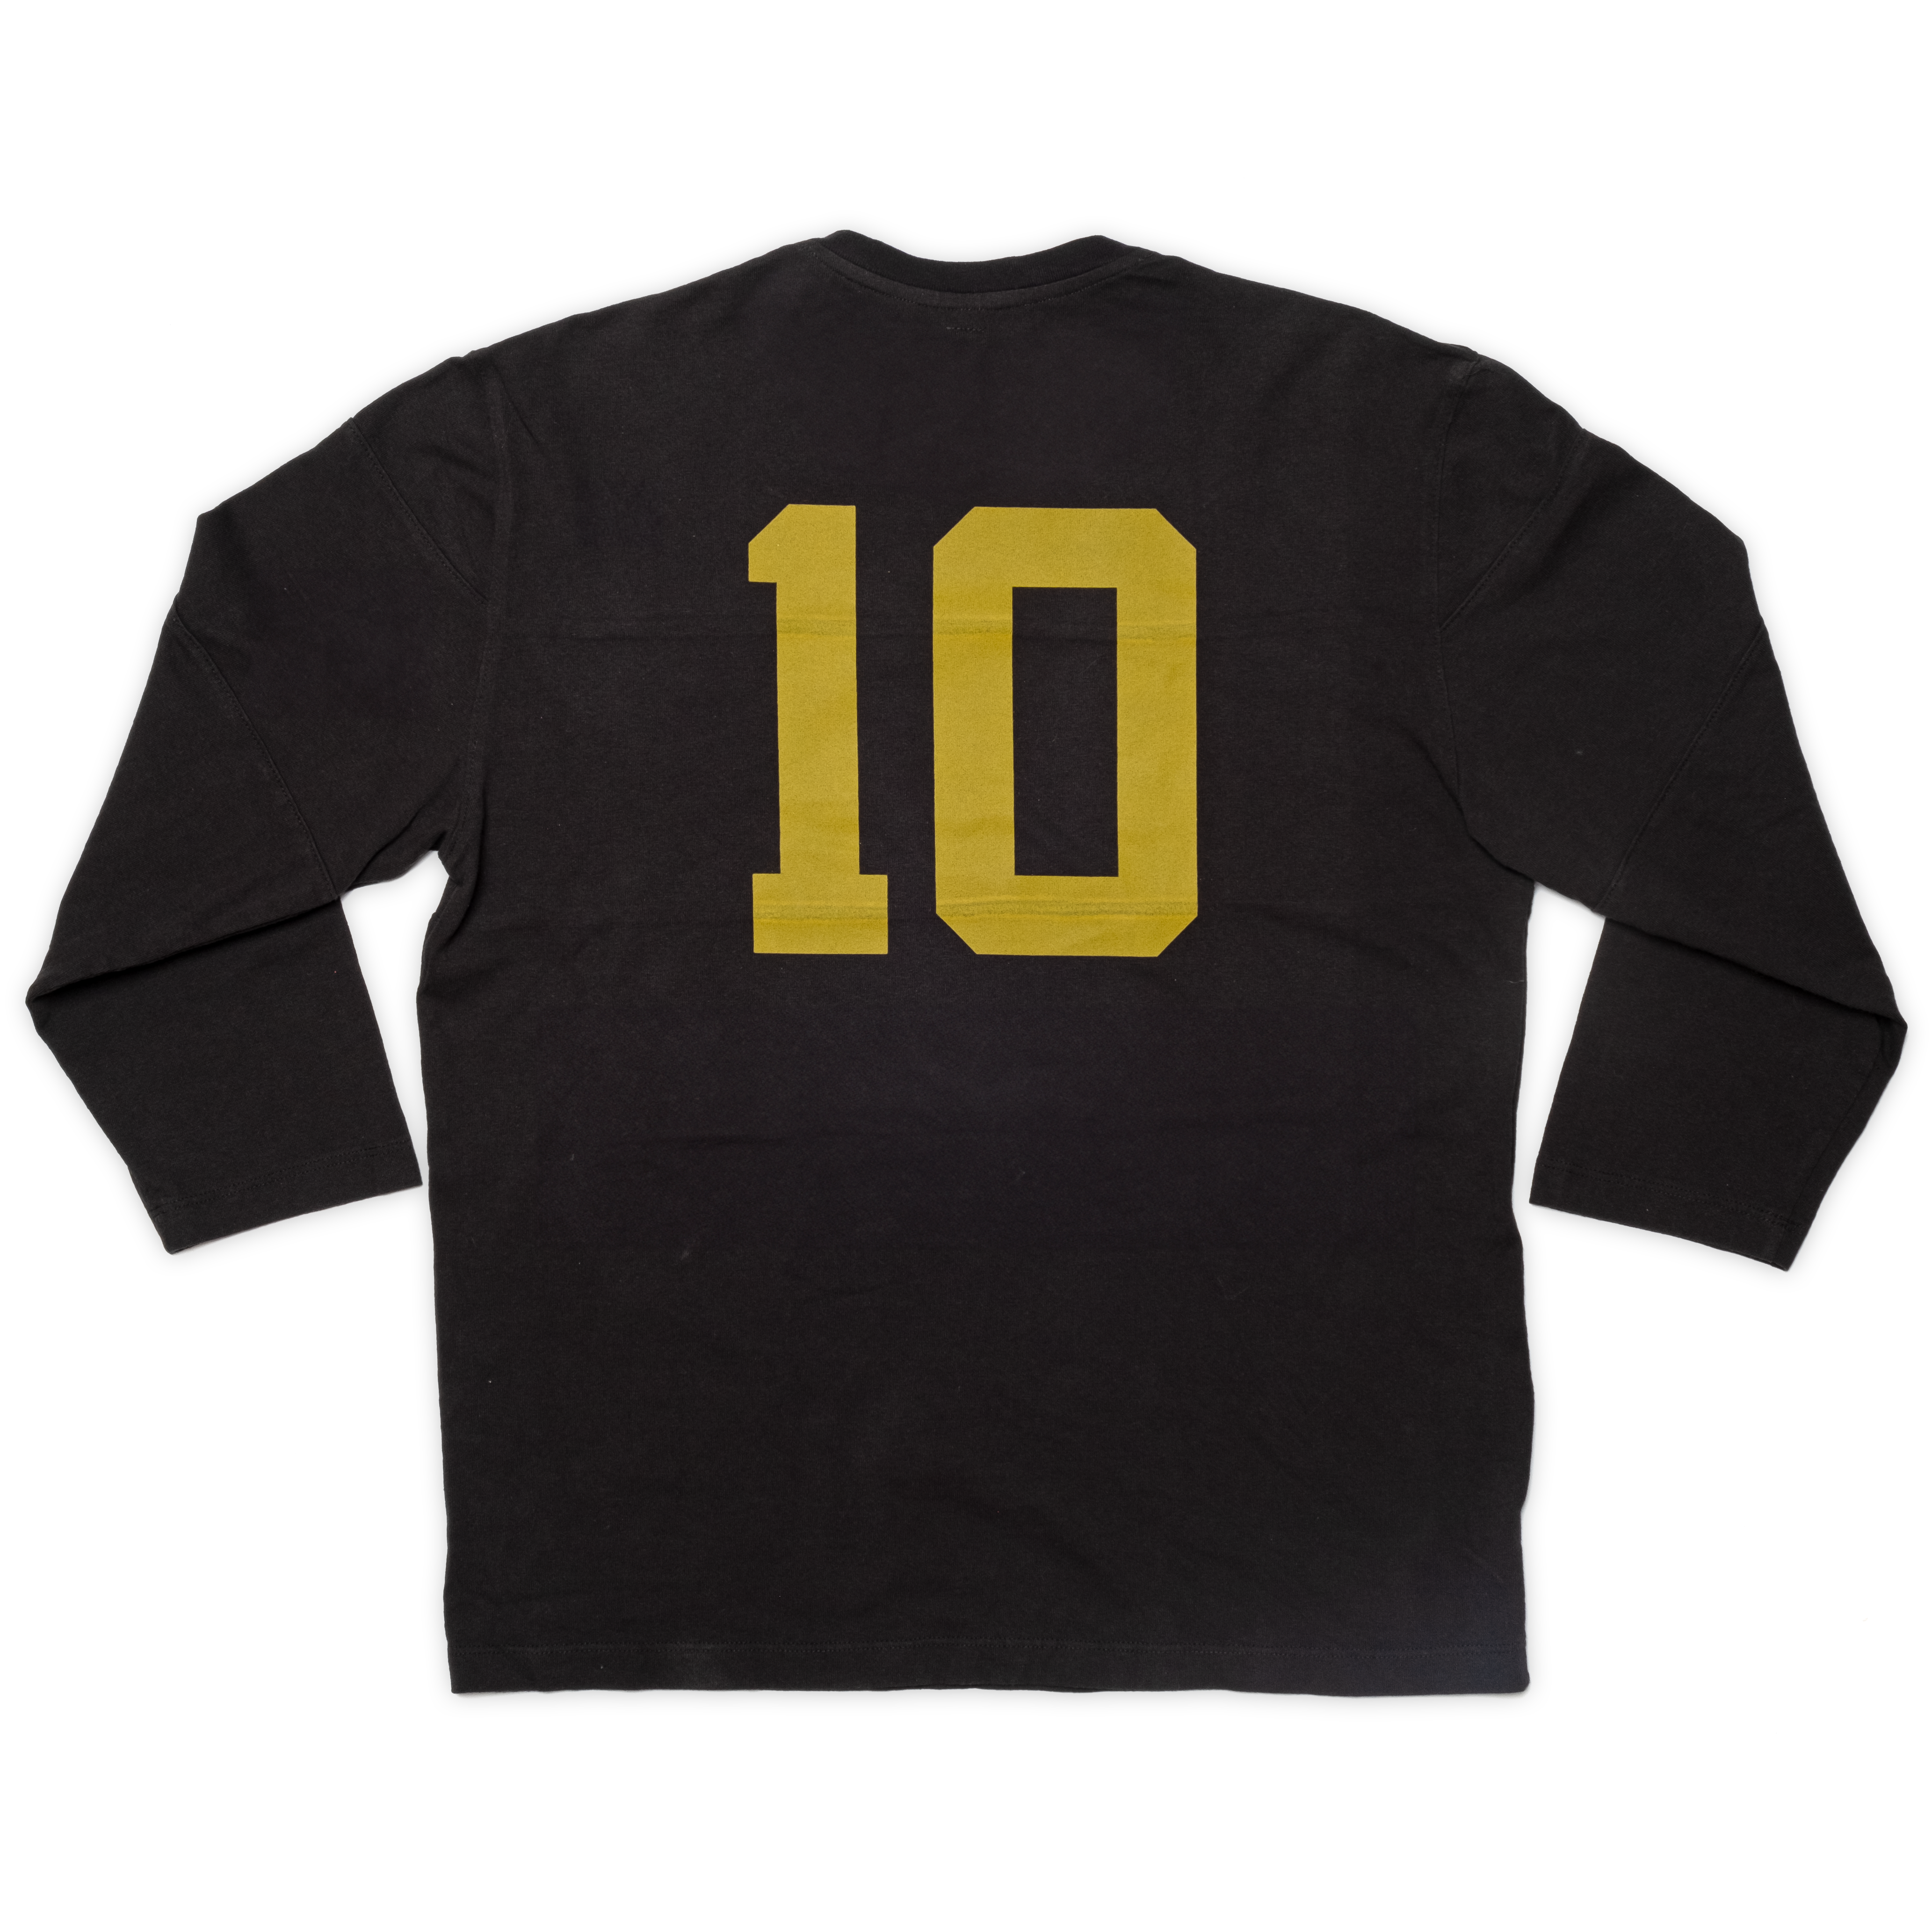 Limited Edition JANE 10-Year Jersey - Black